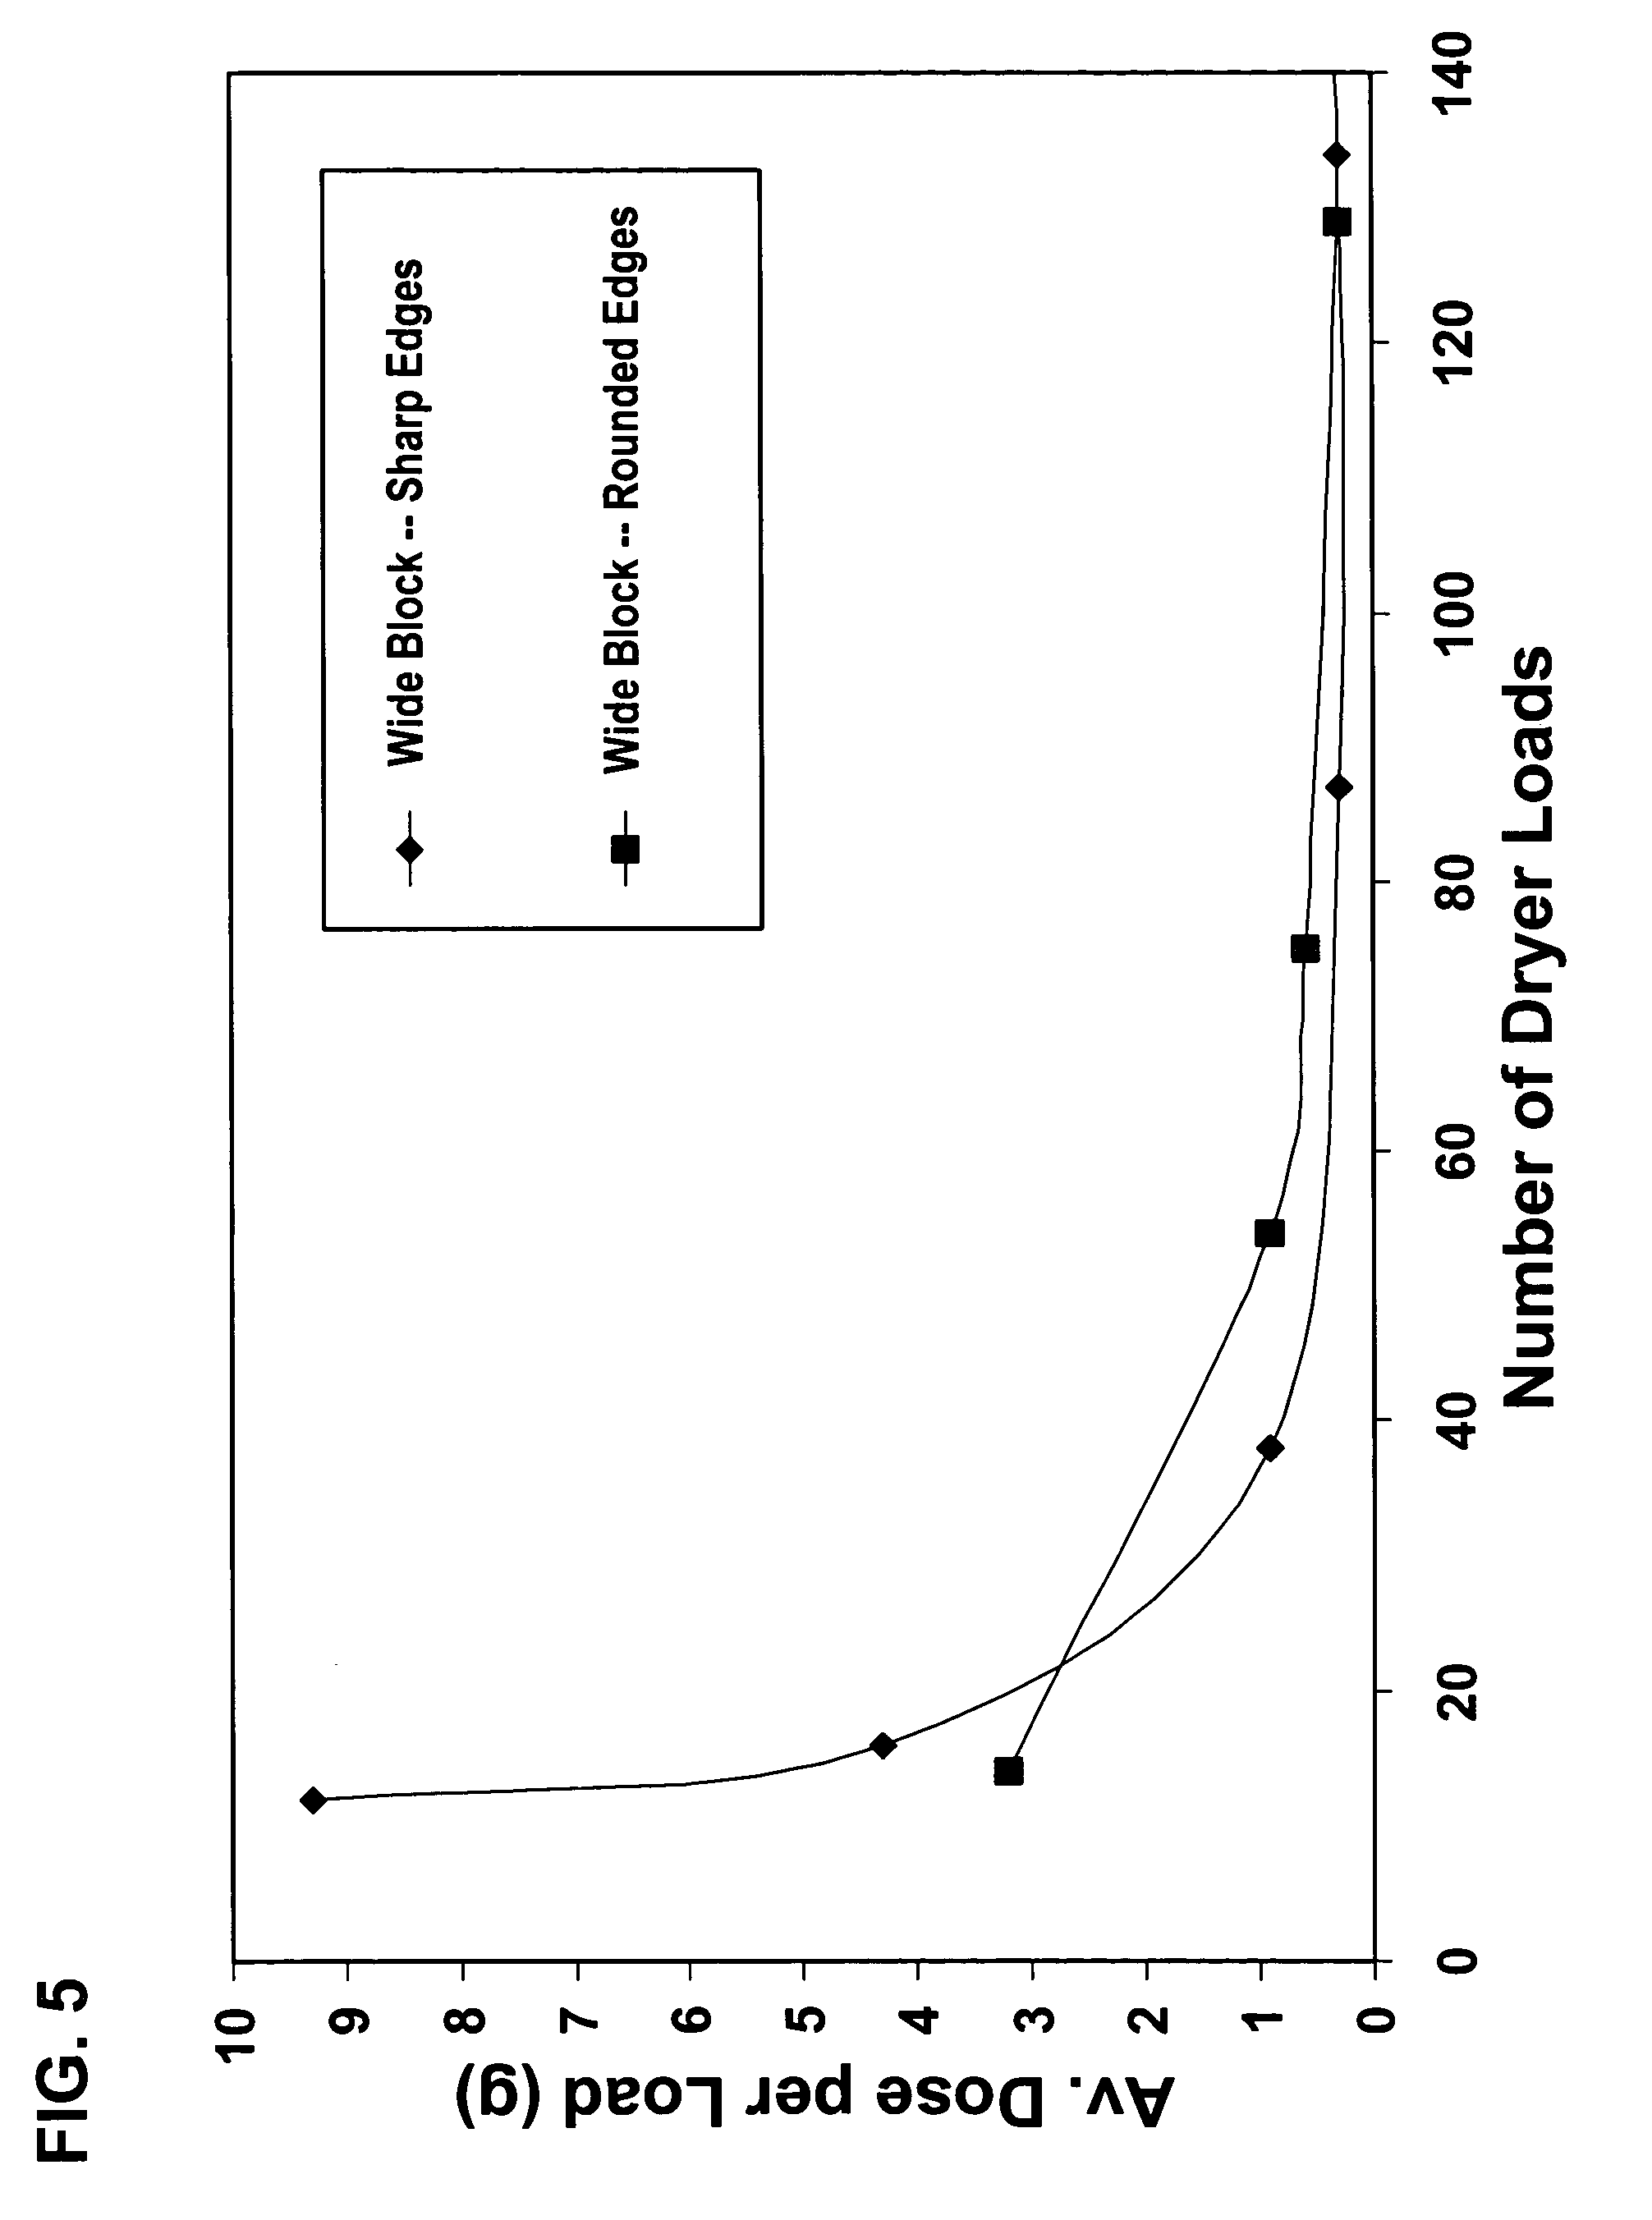 Fabric treatment compositions and methods for treating fabric in a dryer